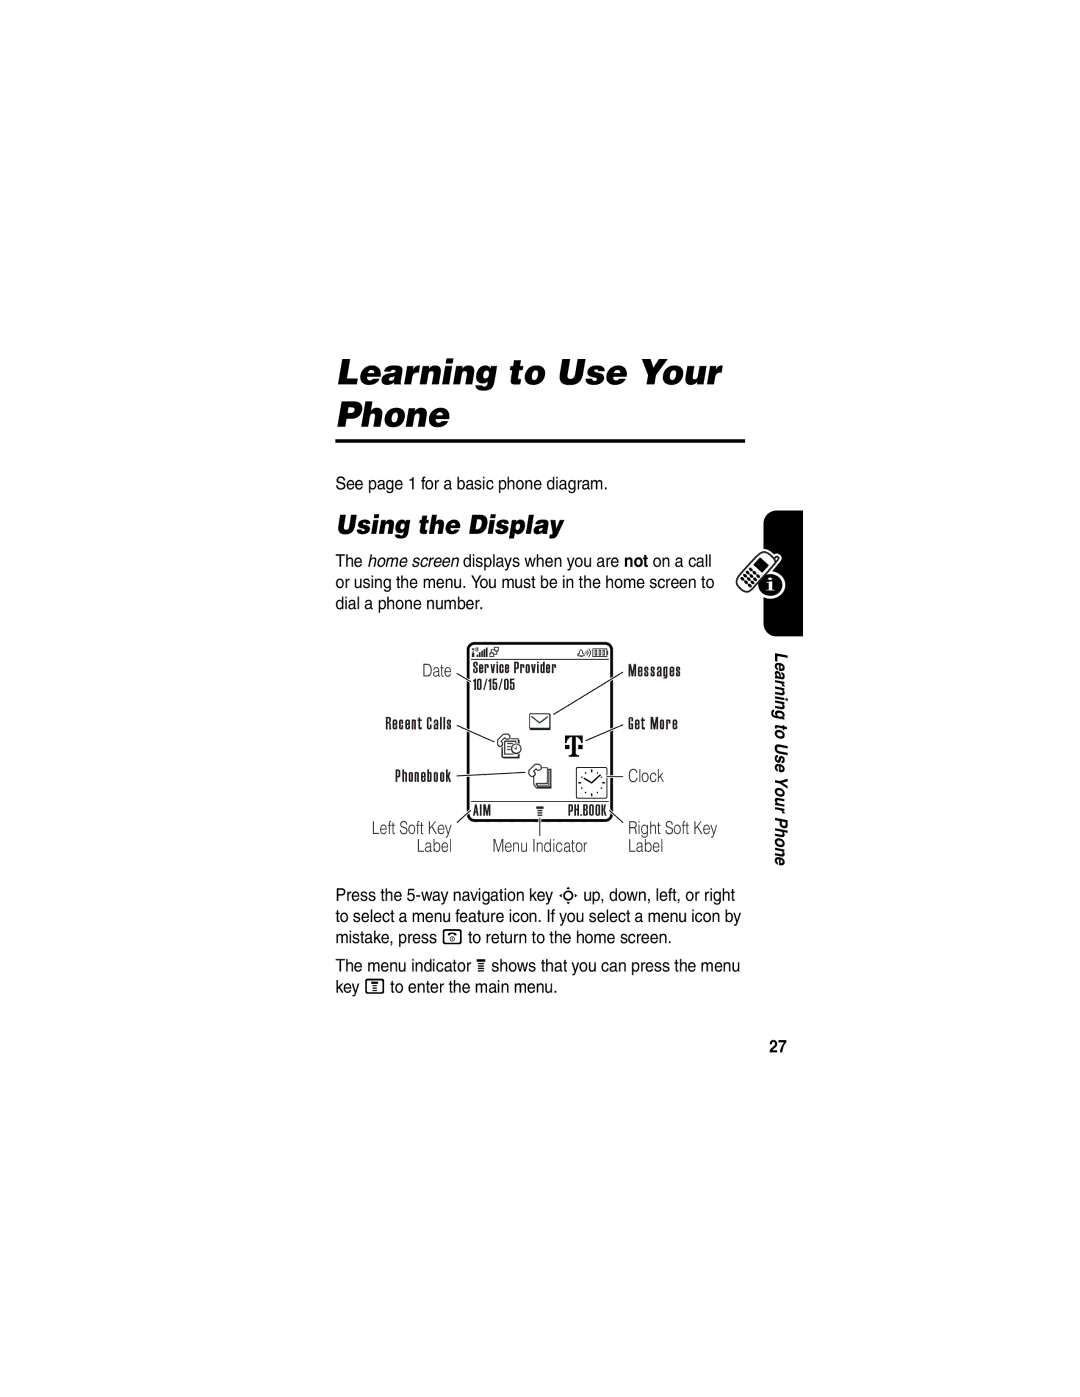 Motorola V330 manual Learning to Use Your Phone, Using the Display 